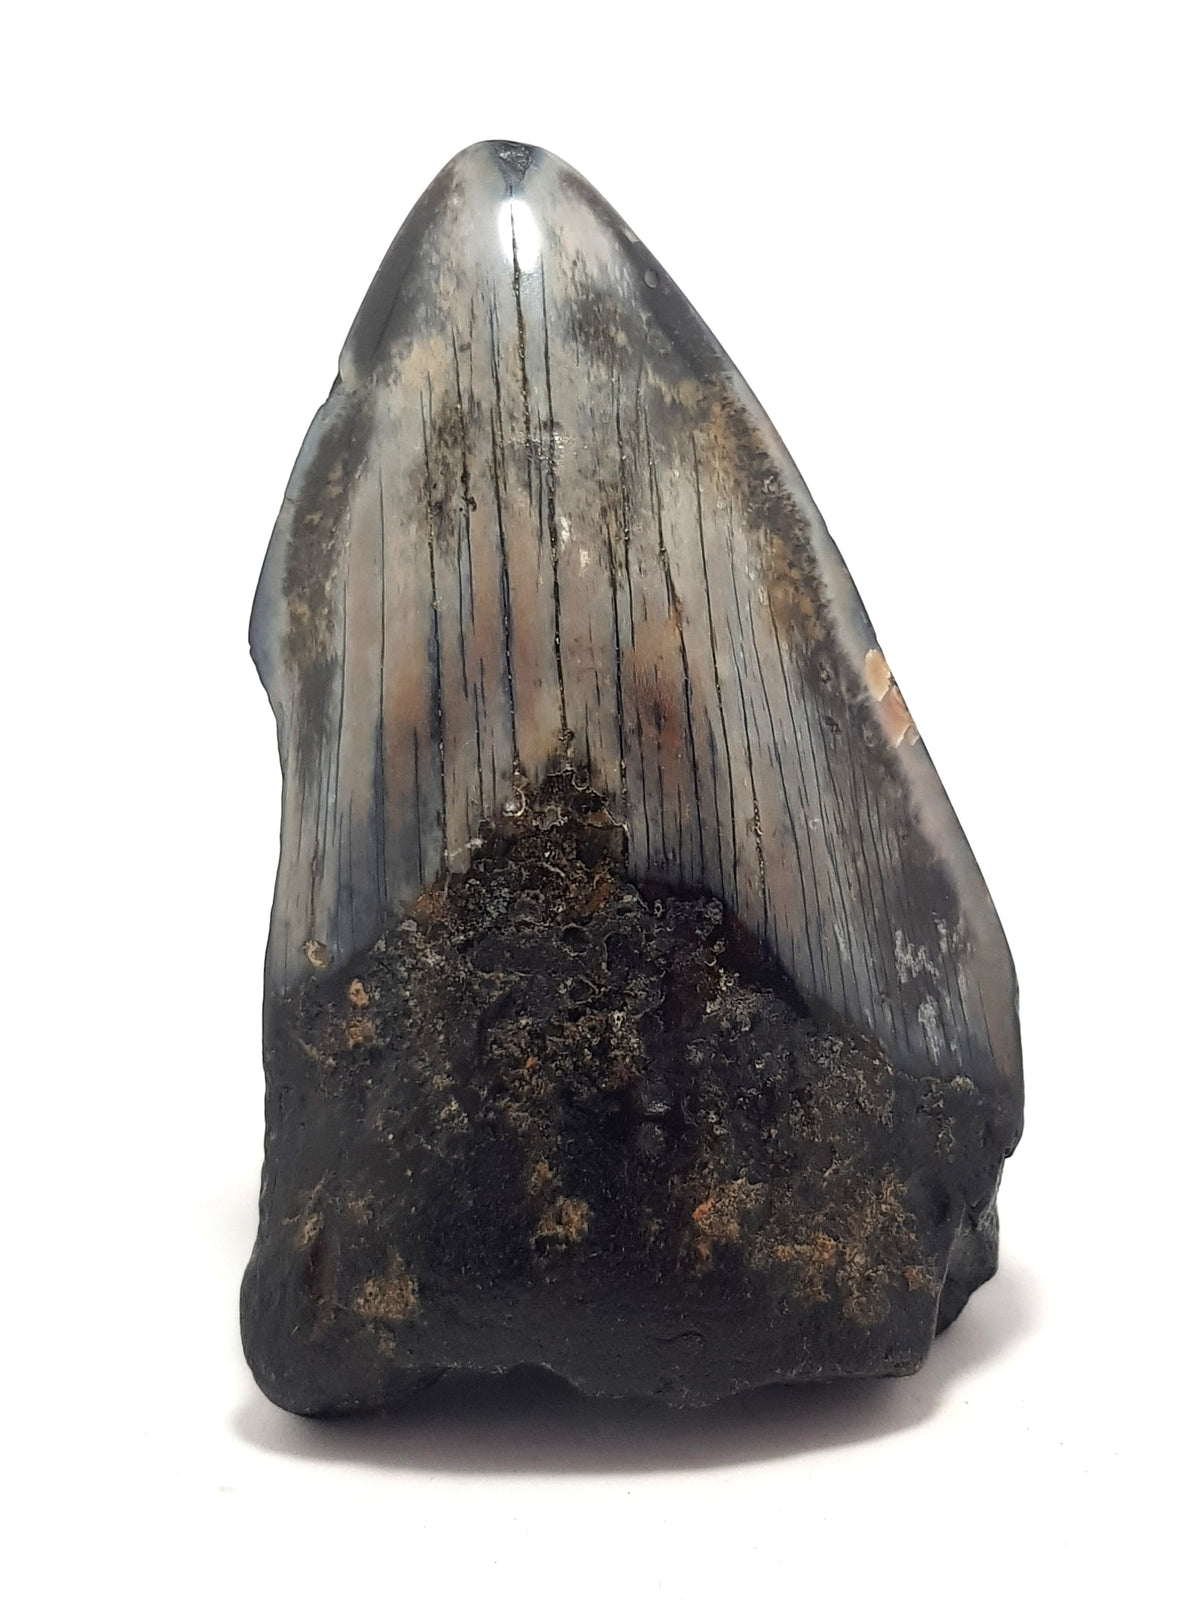 megaladon tooth. grey enamel present, but it cracking, the main body of the tooth is black. The bottom right corner of the root and distal crown are missing.